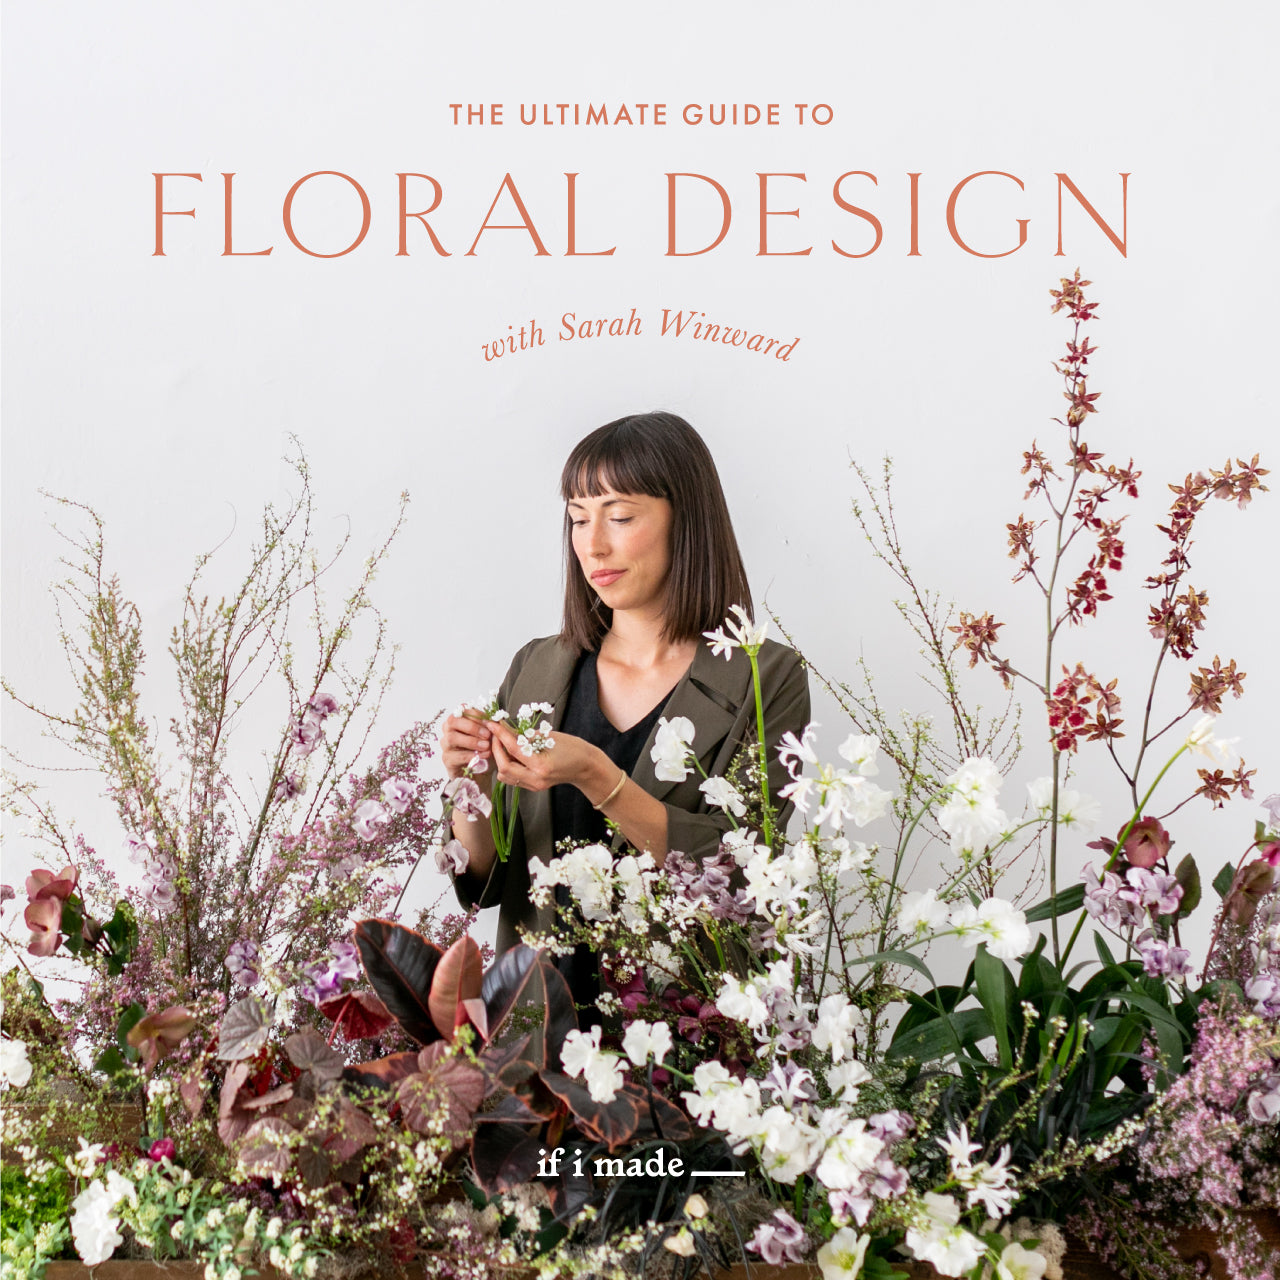 The Ultimate Guide to Floral Design with Sarah Winward (EEGPP20)-  26 payments of $69